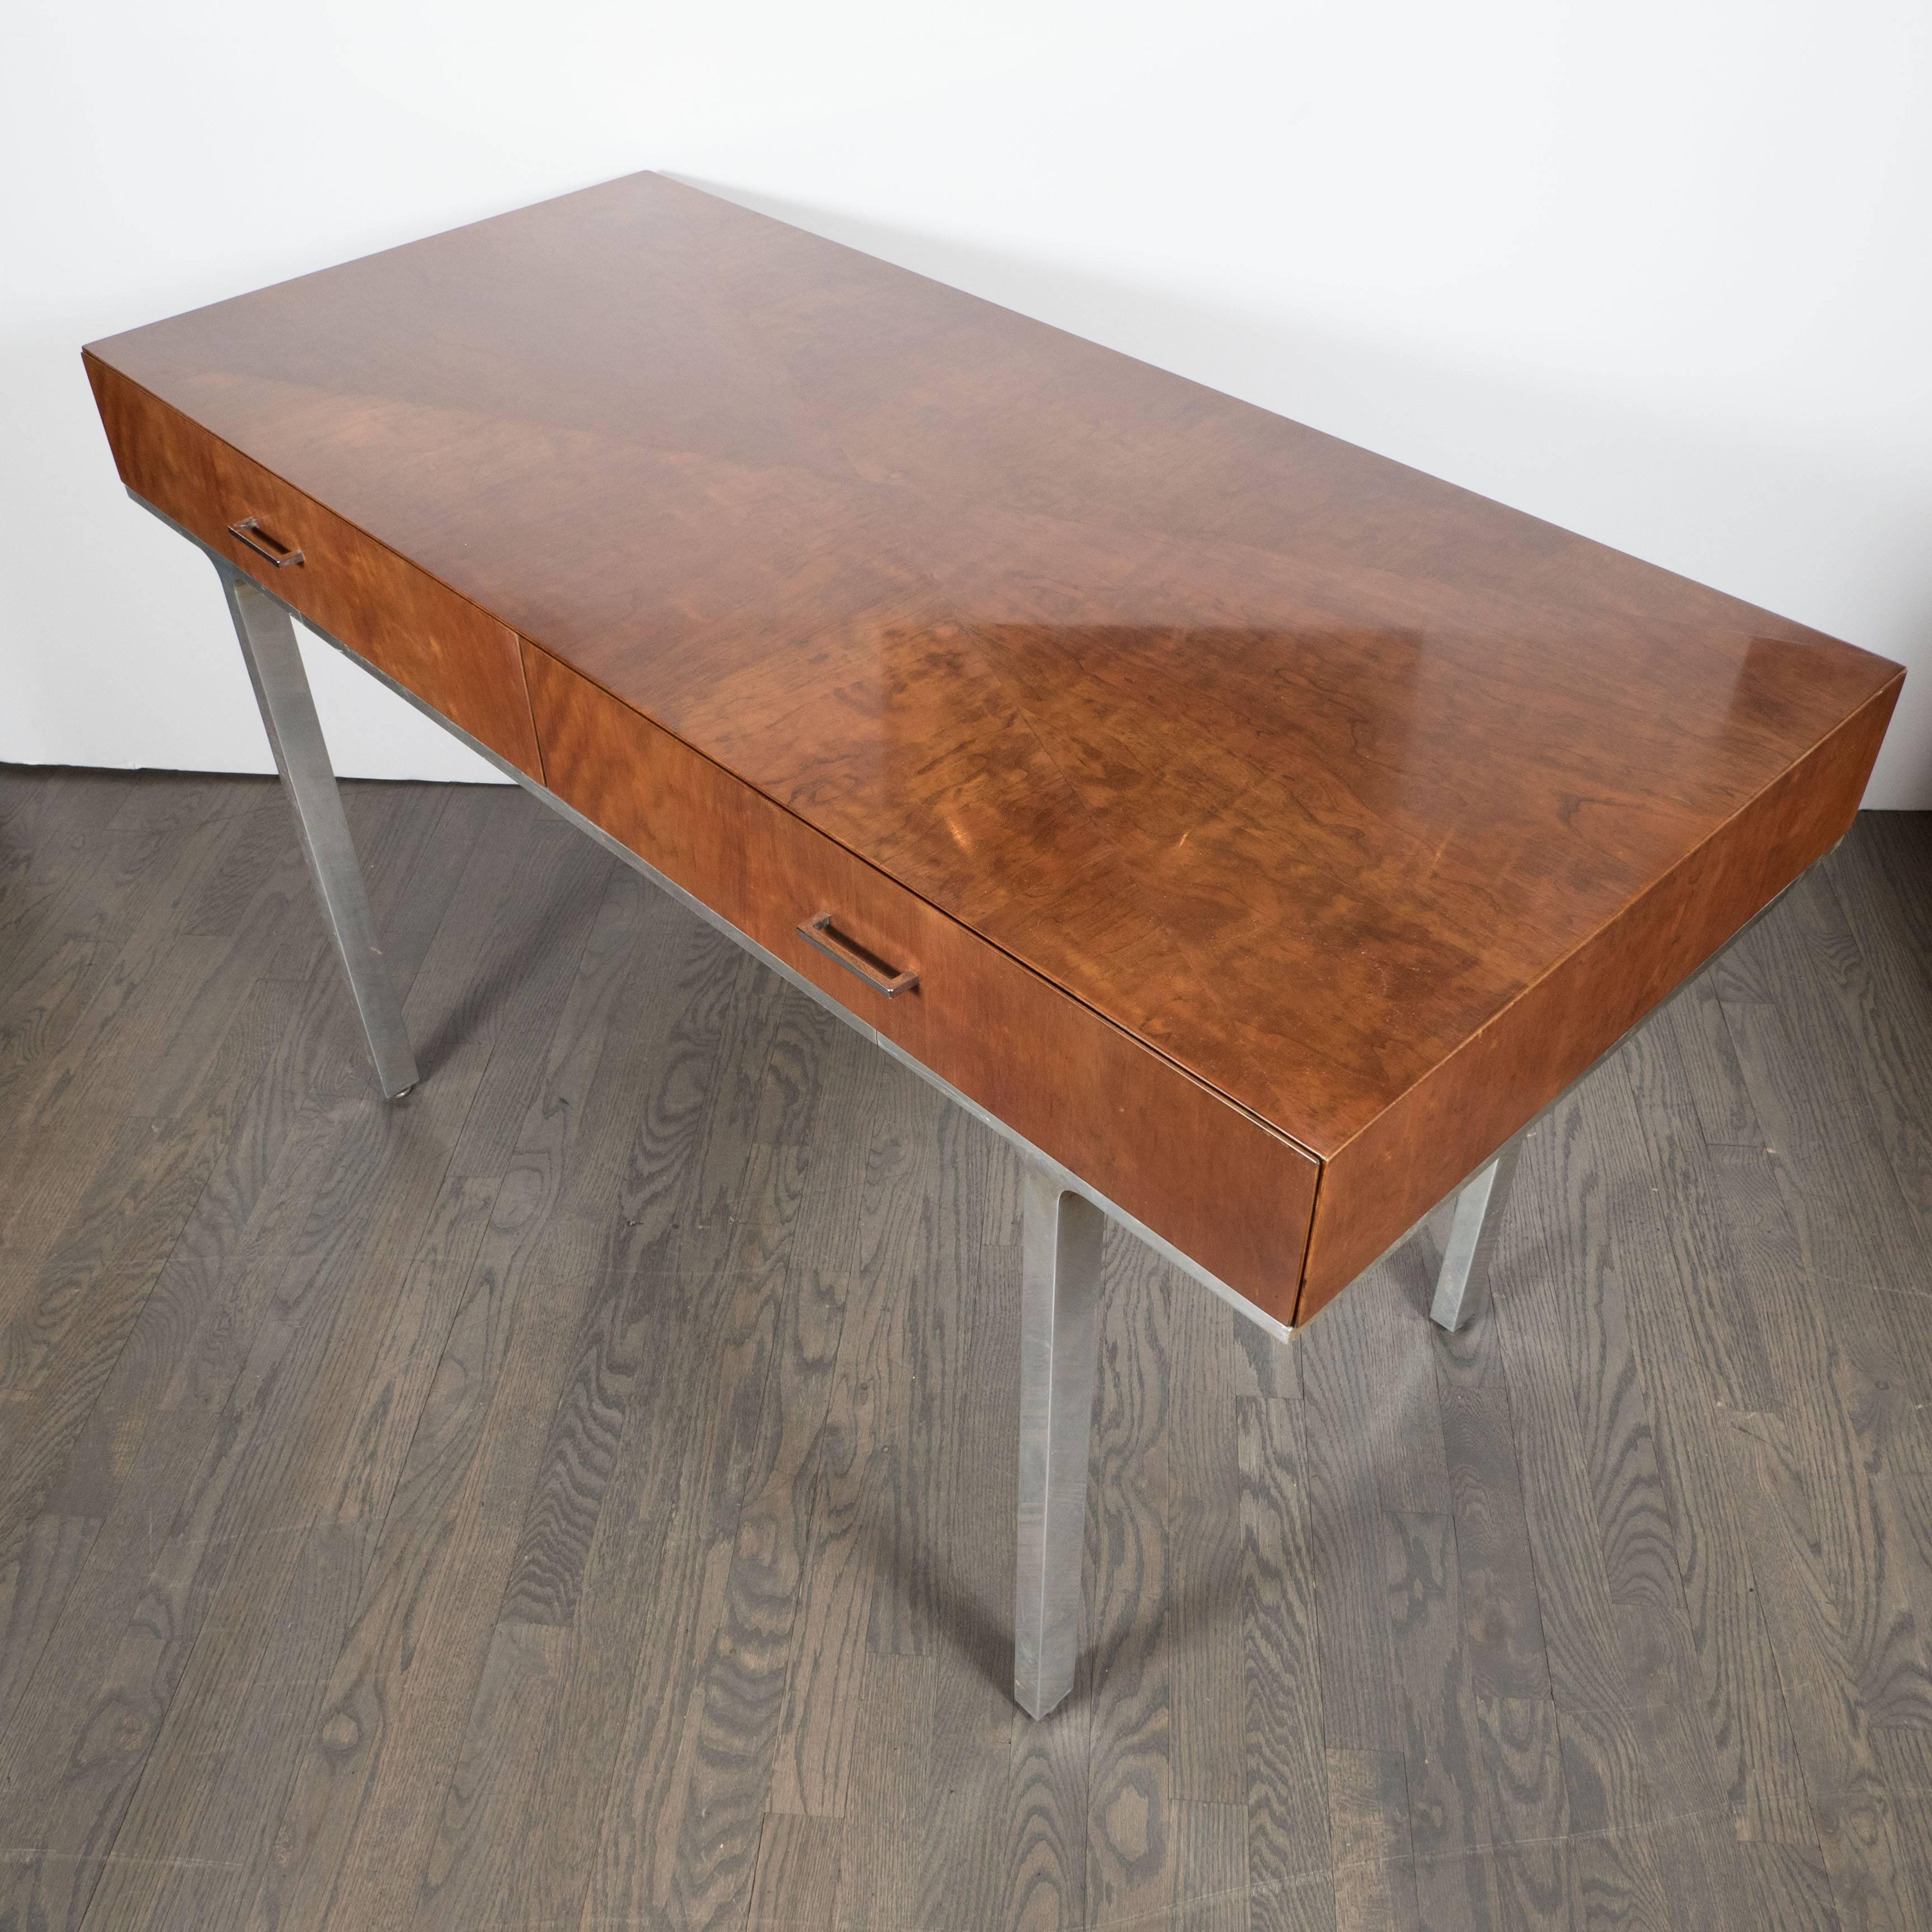 Mid-Century Modern Desk in Polished Aluminum and Bookmatched Walnut, American  3